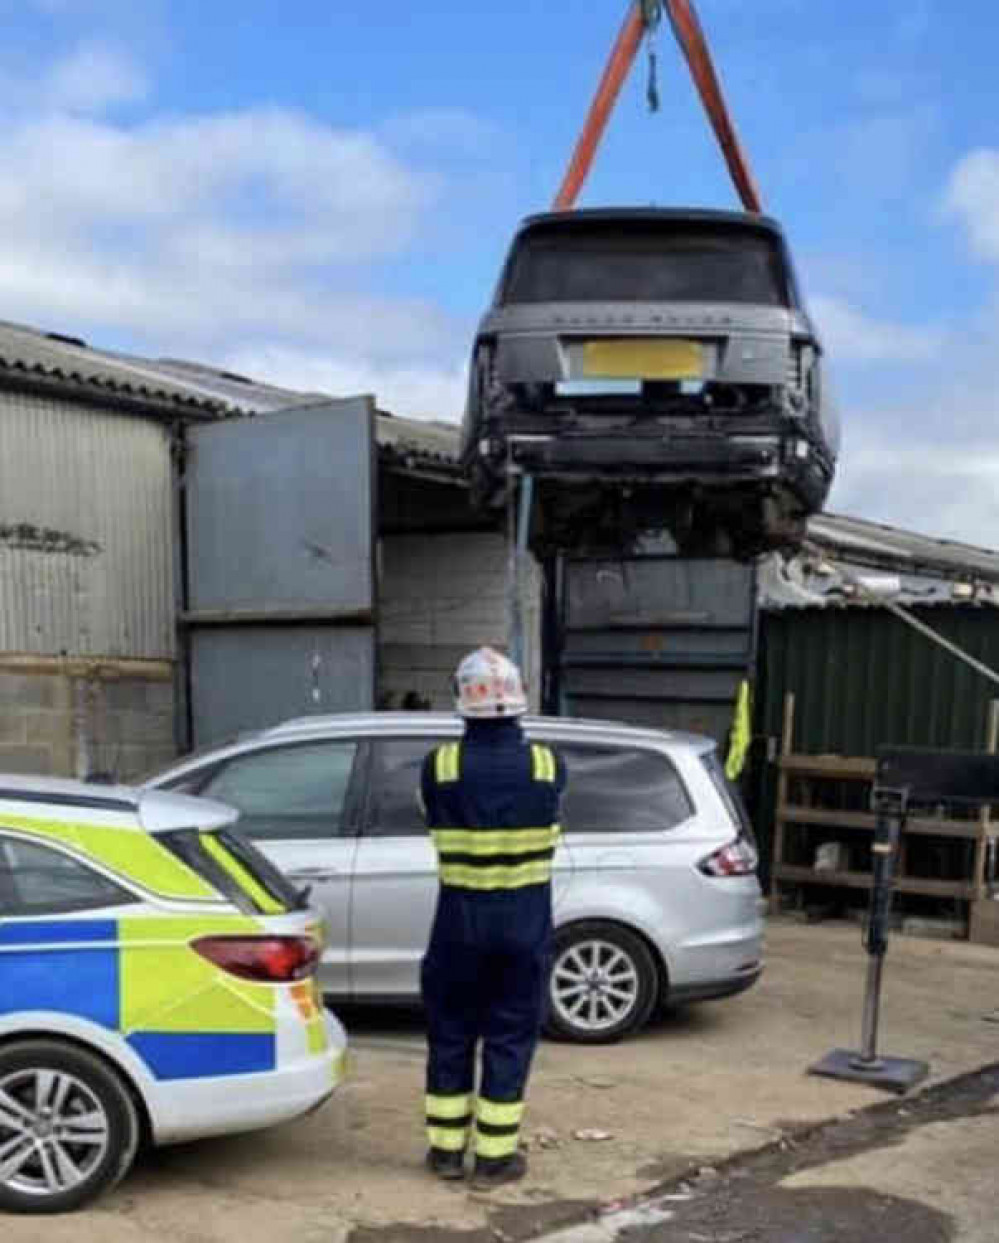 Cops Raid Thurrock Site And Discover Stolen Cars Local News News Thurrock Nub News By 1149